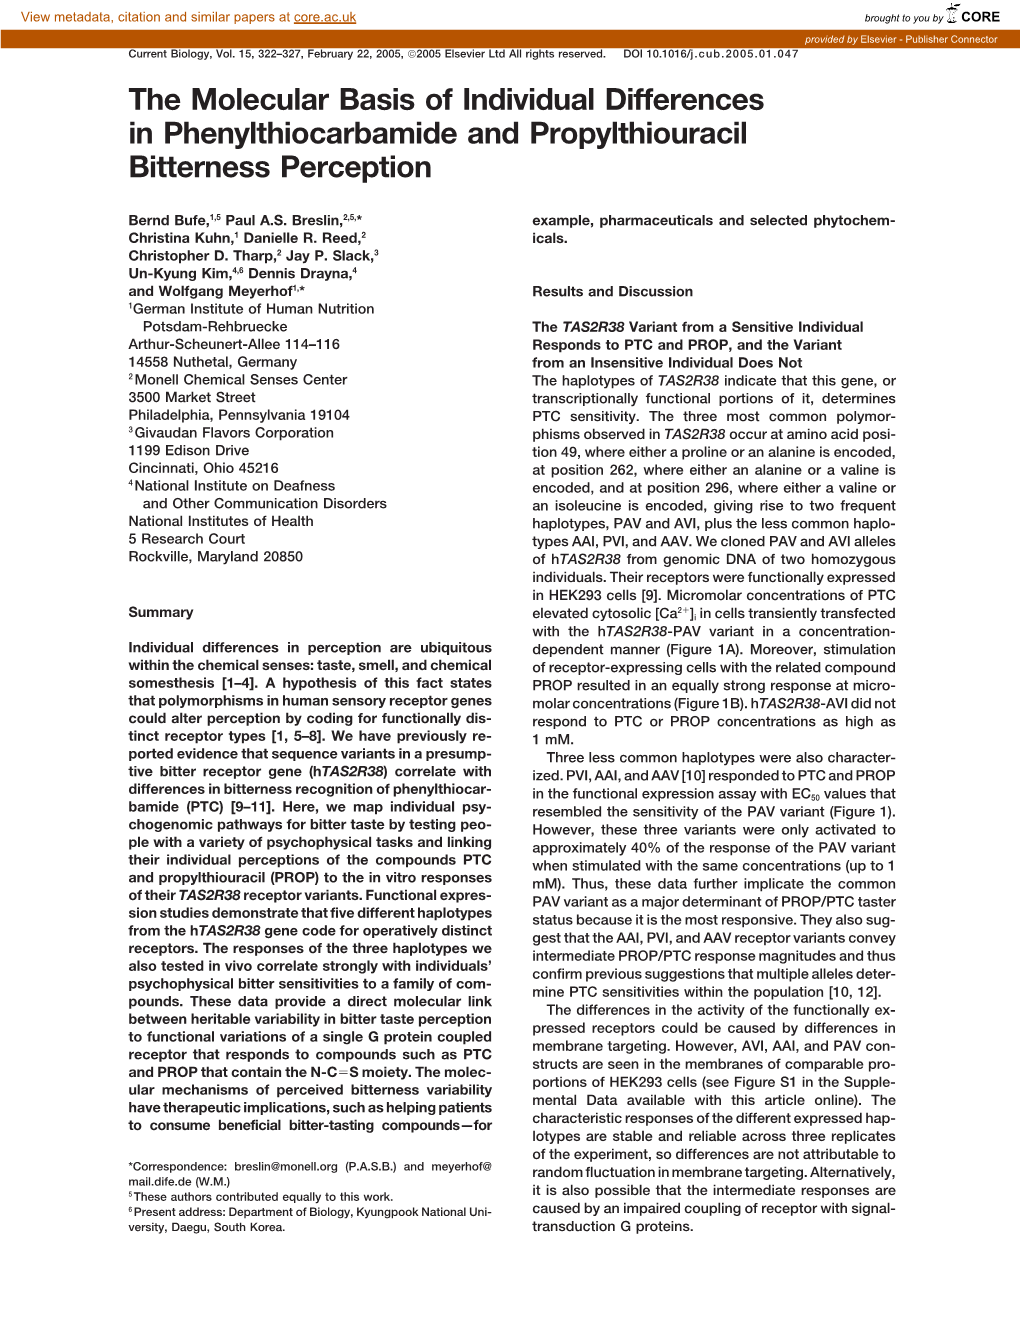 The Molecular Basis of Individual Differences in Phenylthiocarbamide and Propylthiouracil Bitterness Perception